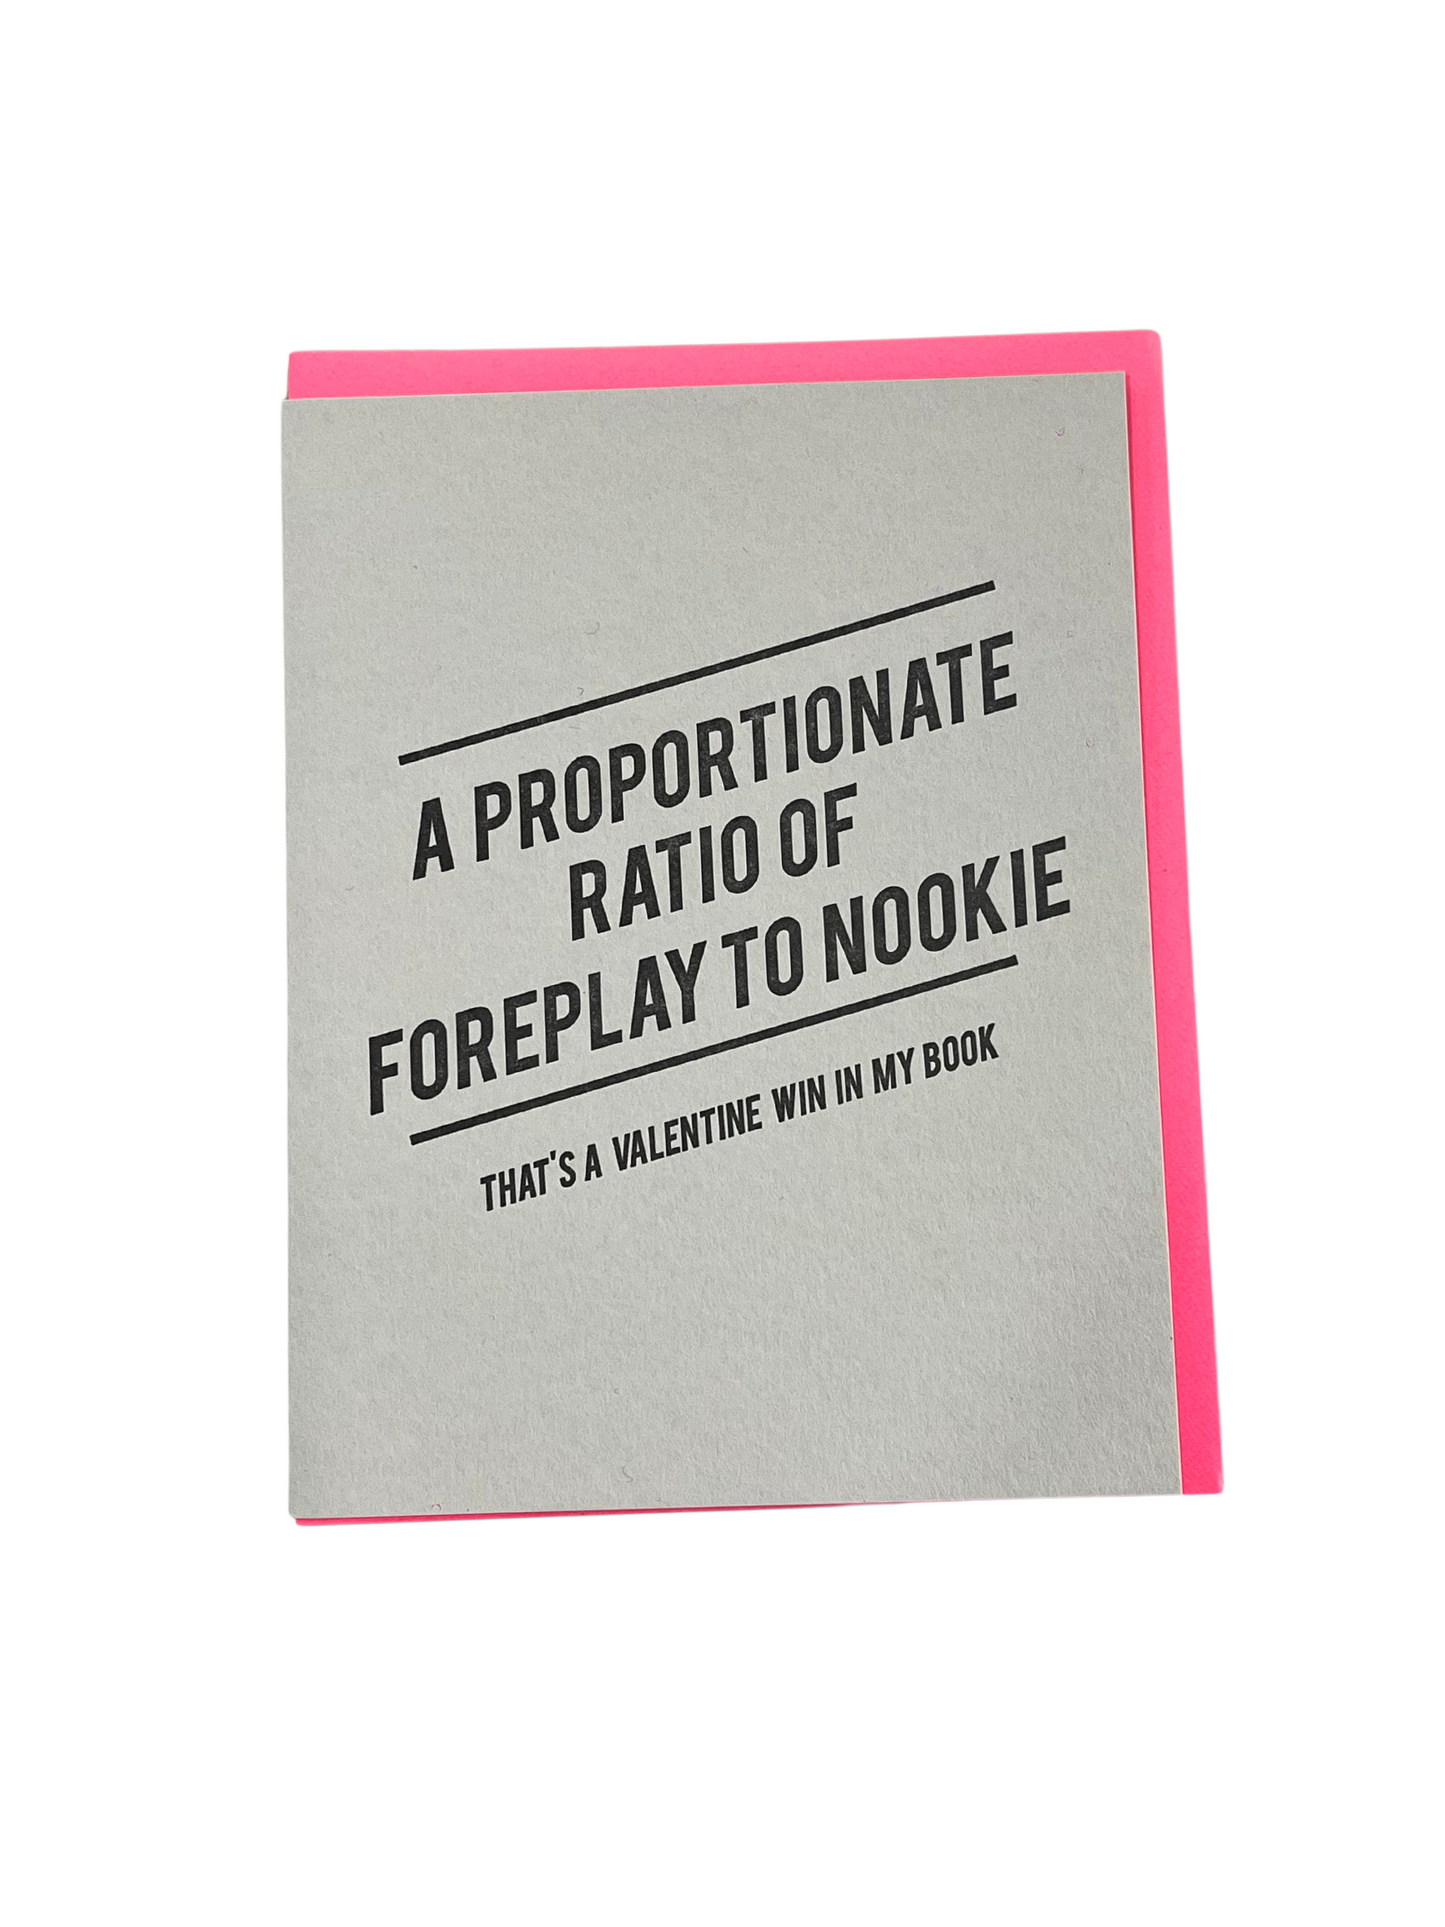 A Proportionate Ratio of Foreplay to Nookie Card